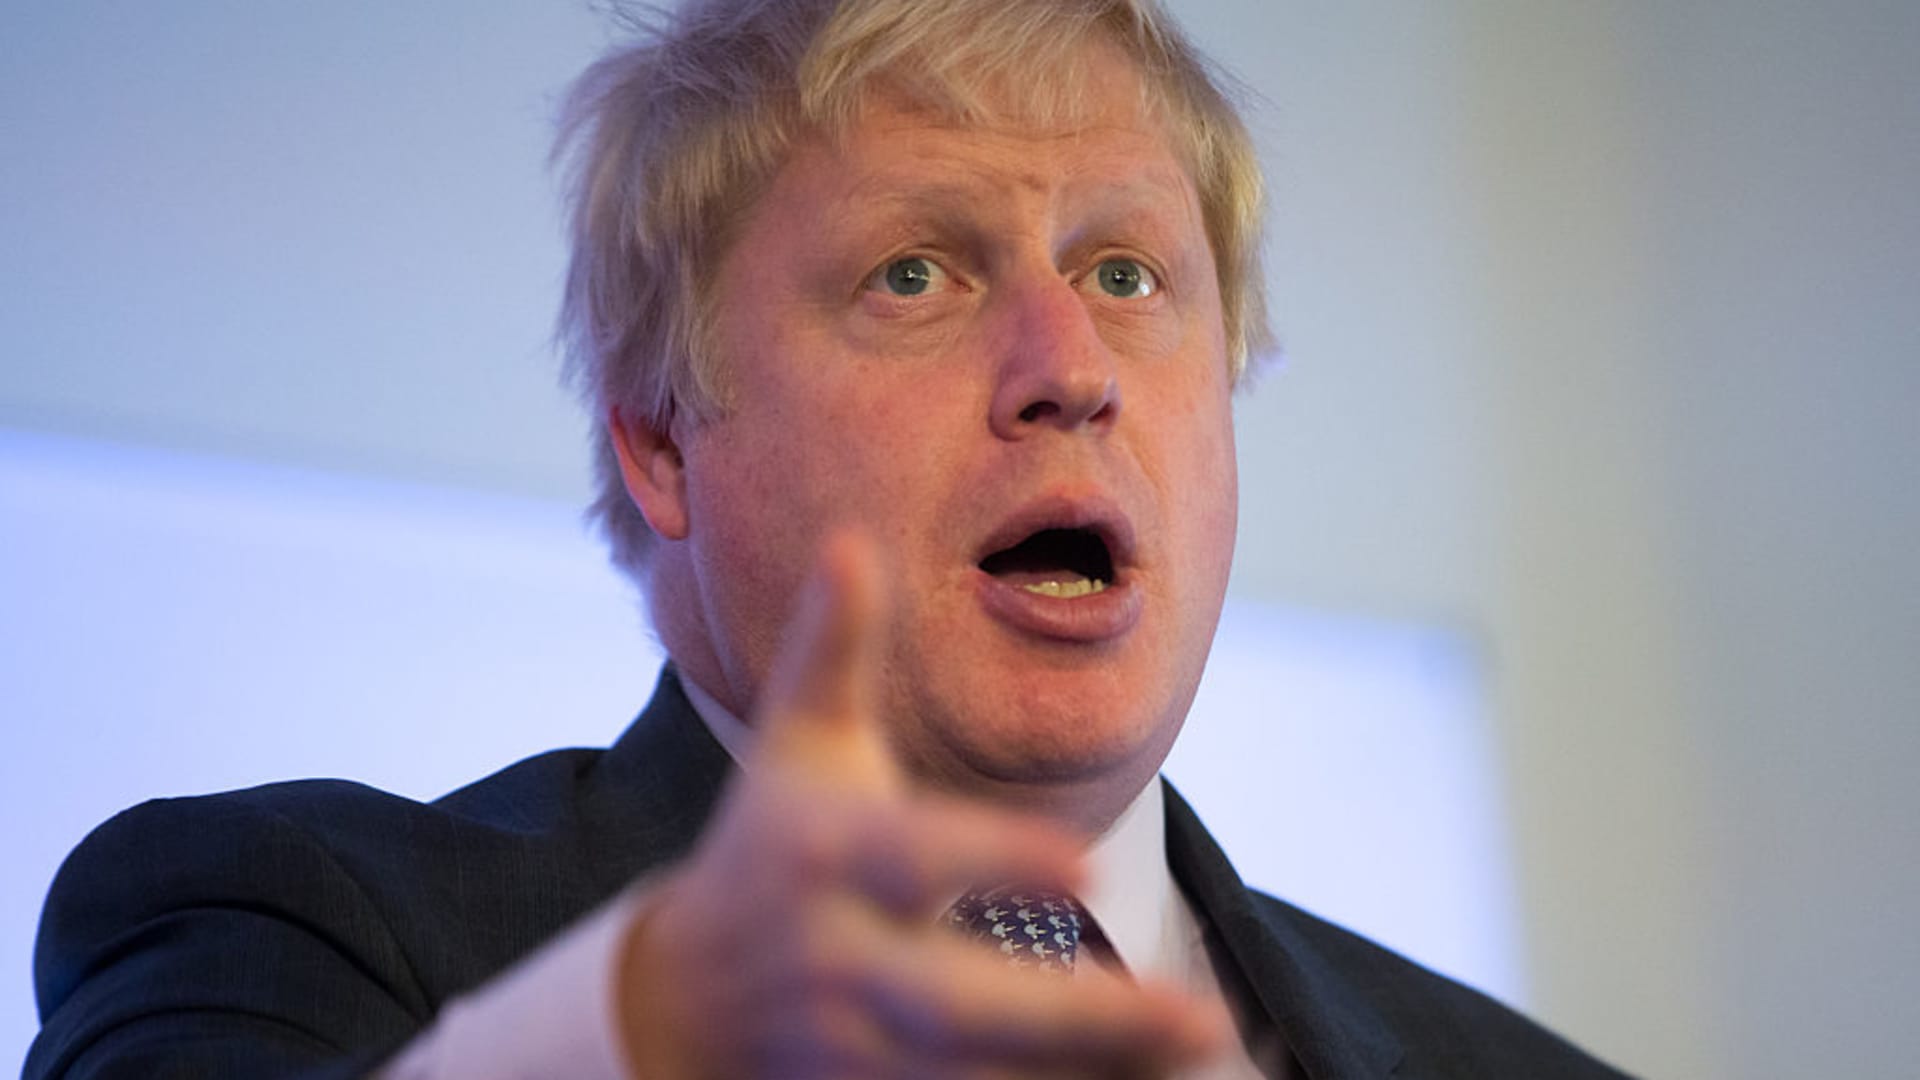 Conservative MP Boris Johnson speaks as he visits Bristol on May 14, 2016 in Bristol, England.